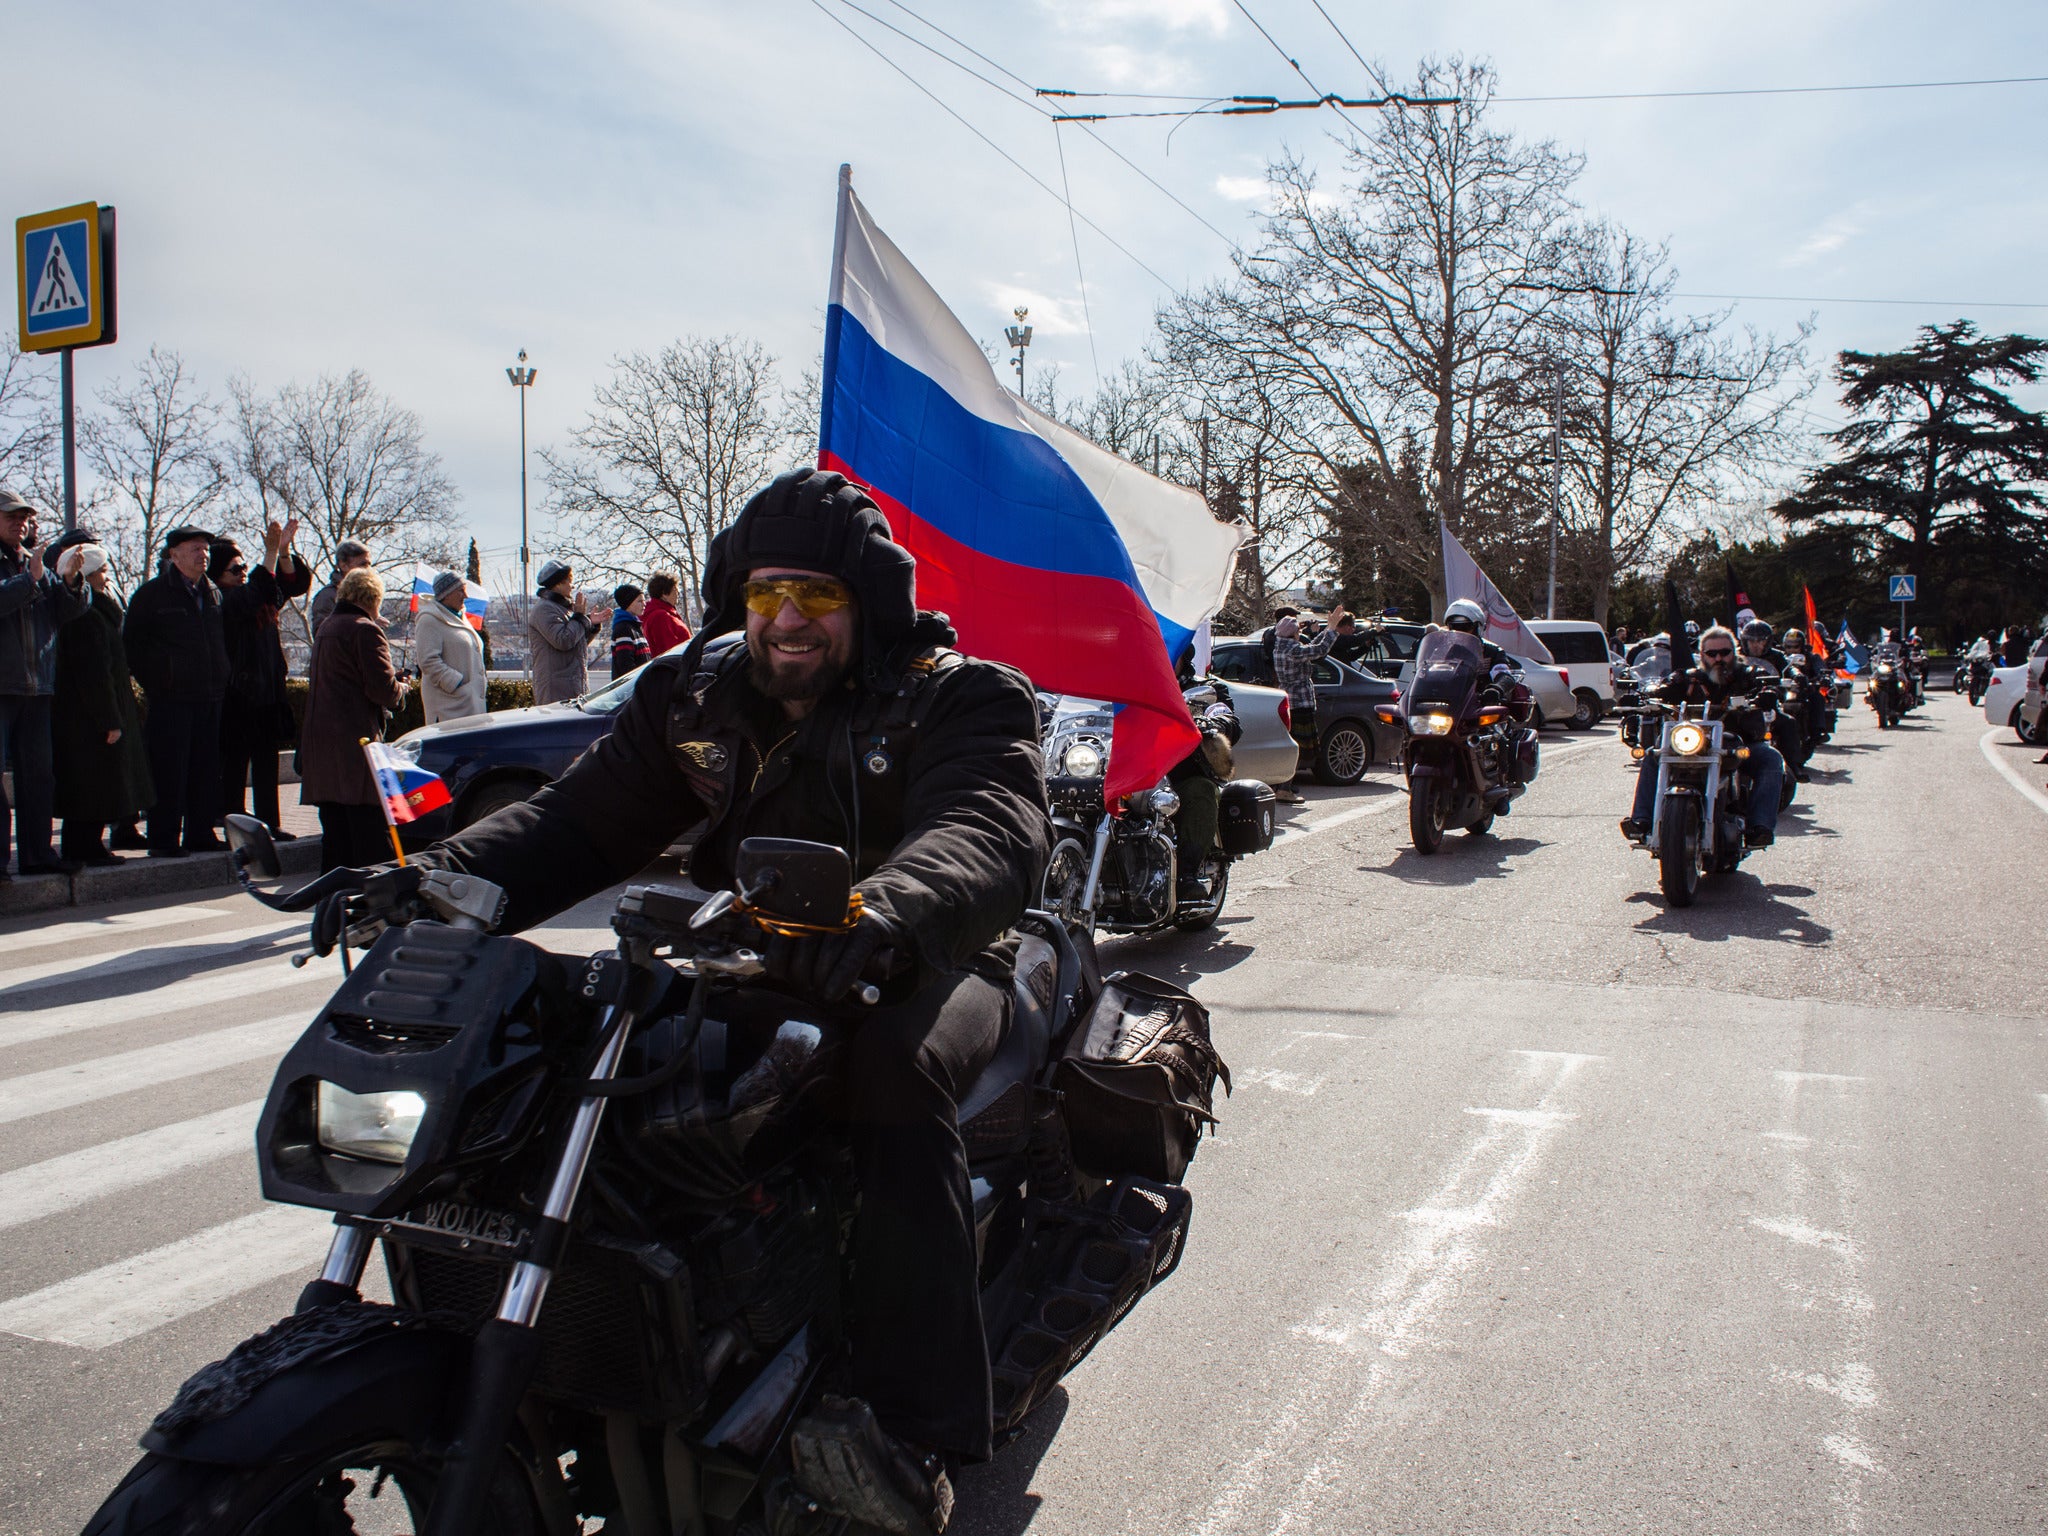 Putinbacked Night Wolves biker group barred from Poland over security